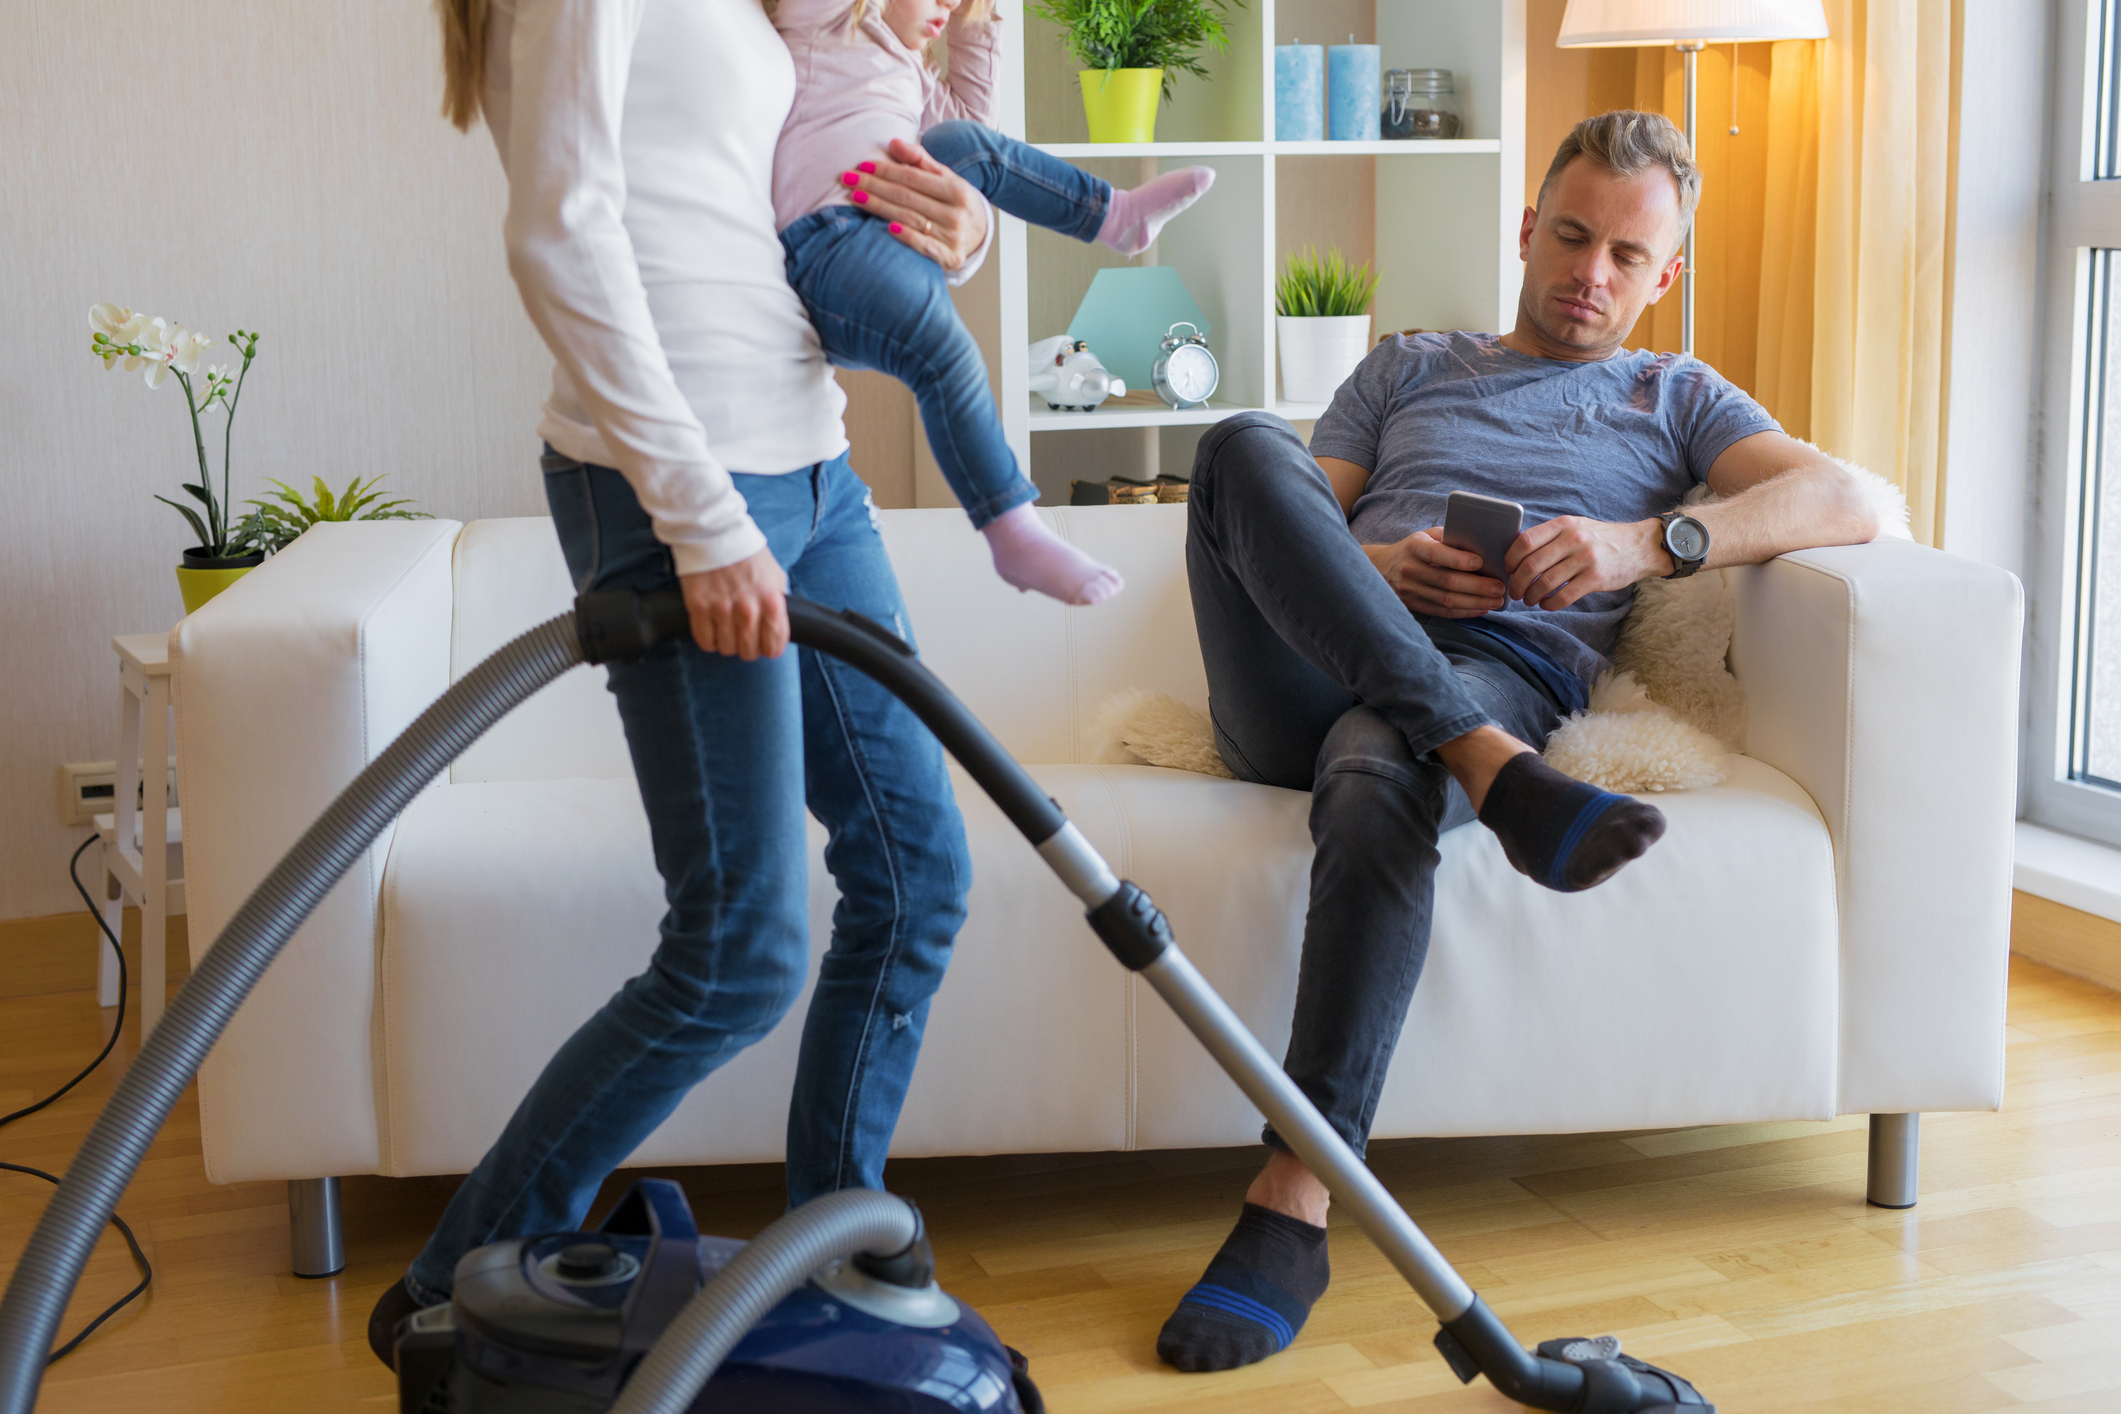 A man sits on a sofa looking at his phone while a woman vacuuming carries a child